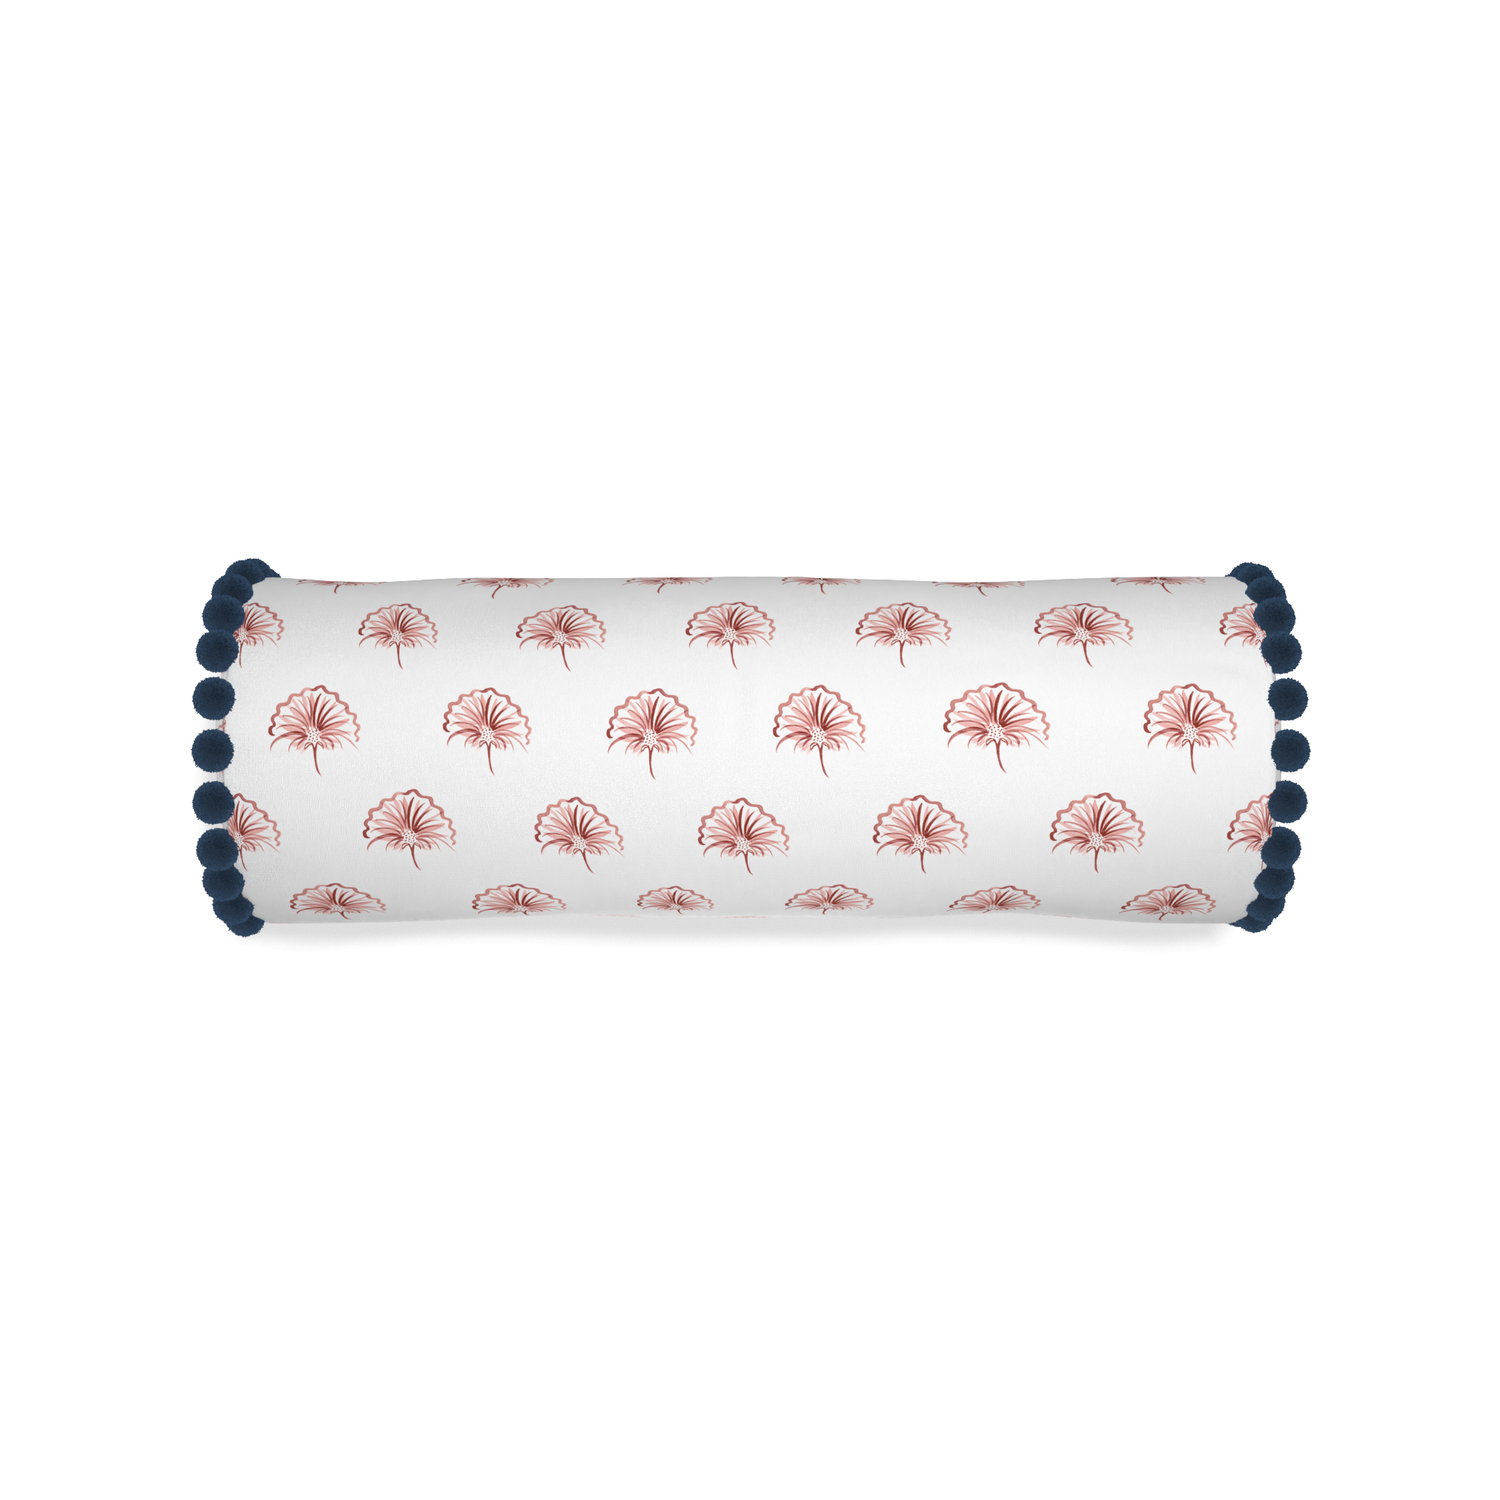 Bolster penelope rose custom floral pinkpillow with c on white background